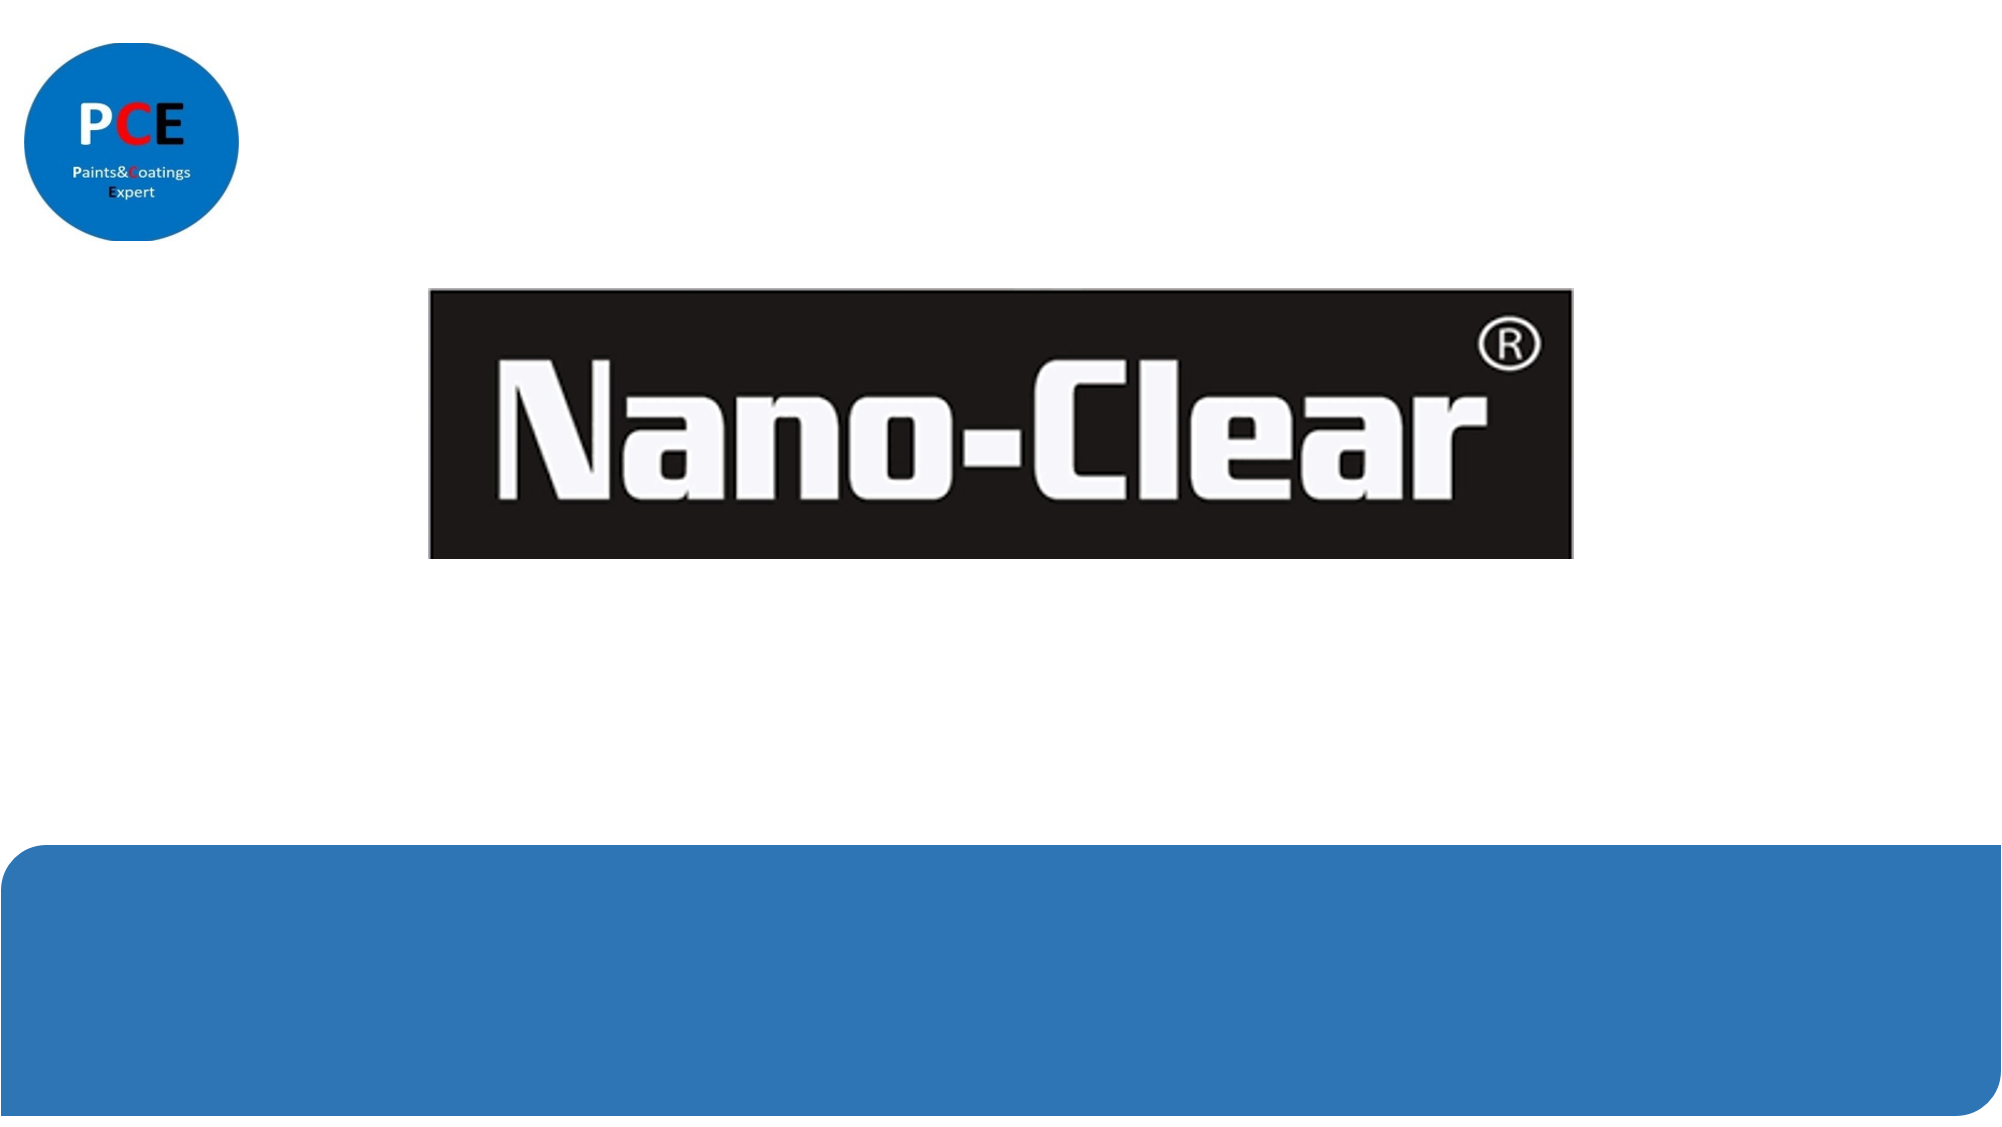 Nano-Clear® Industrial Coating to Win PaintSquare’s Prestige Award for “Top Coating Product for Steel”